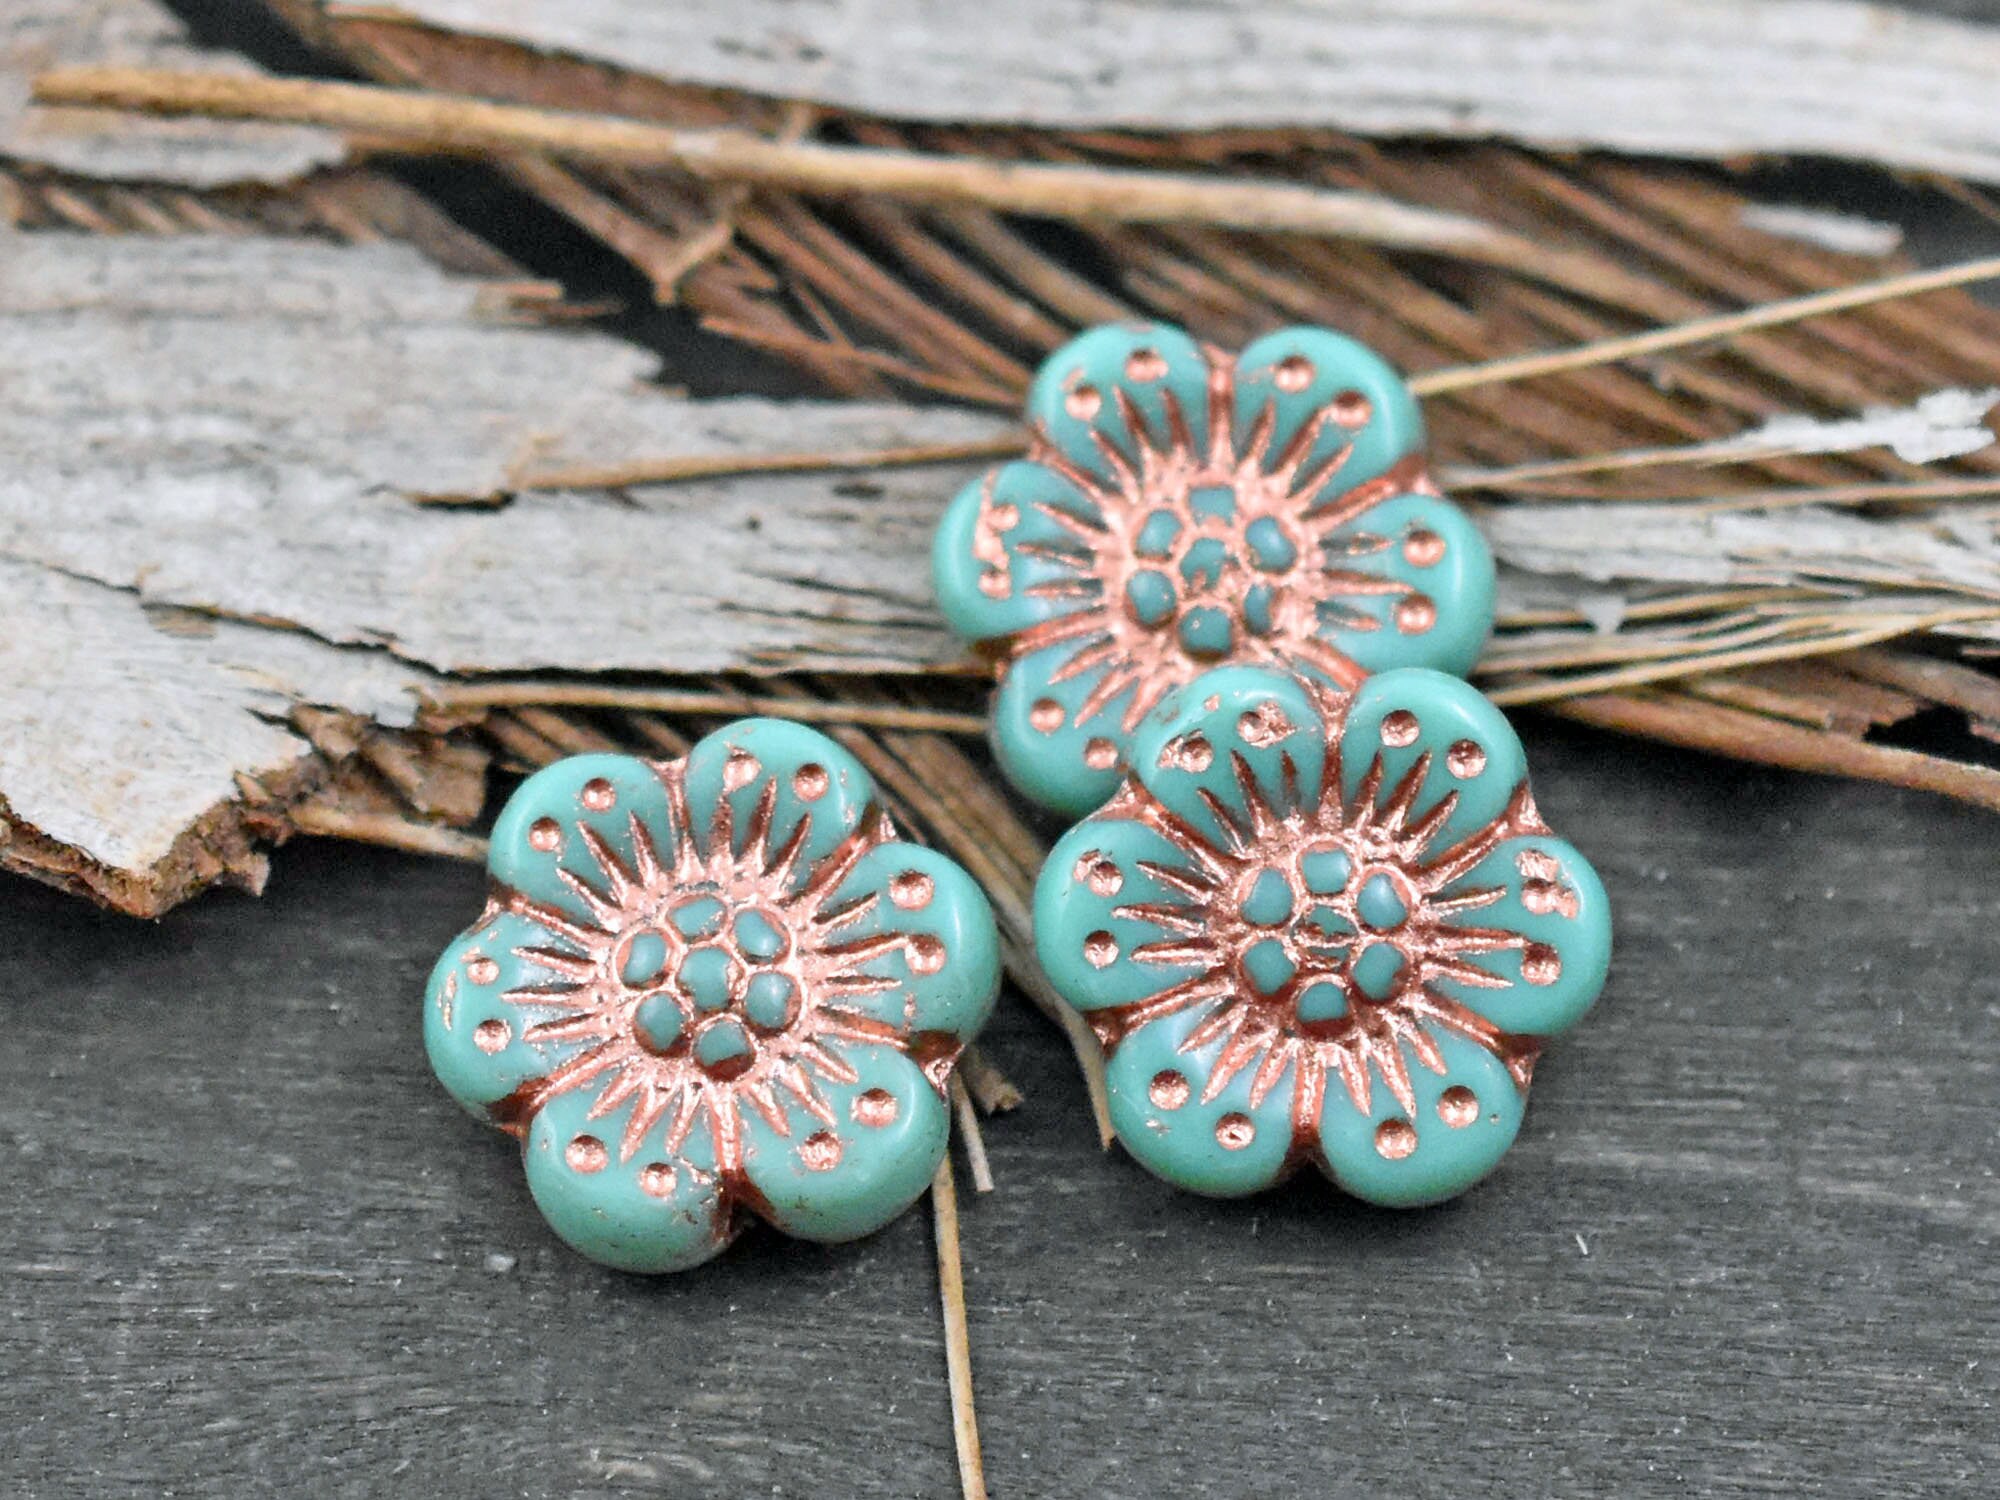 *15* 16x12mm Silver Washed Matte Aqua Top Drilled Dogwood Leaf Beads Czech Glass Beads by GR8BEADS - The Bead Obsession